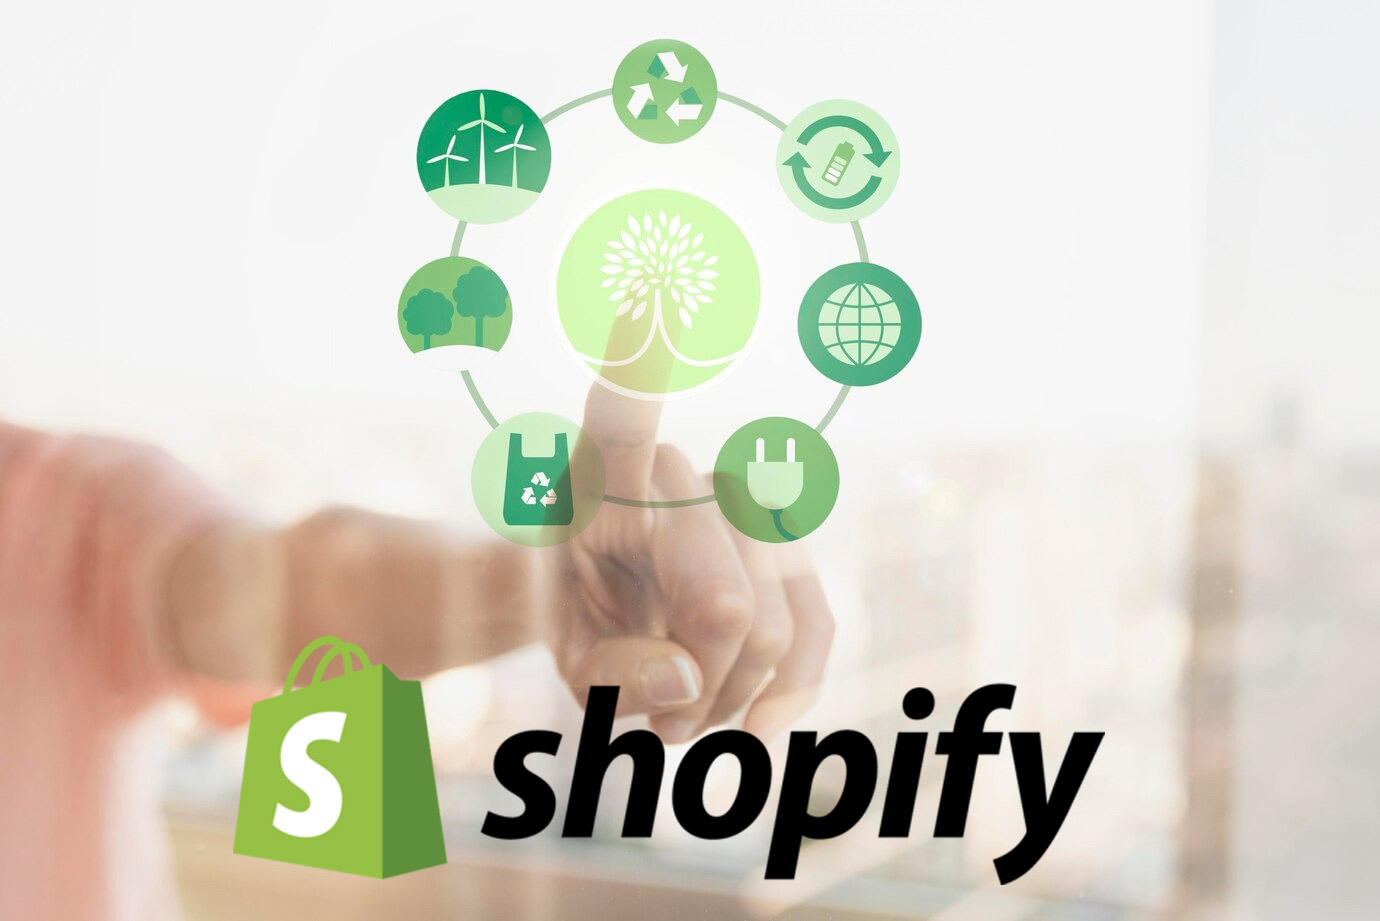 Shopify Update